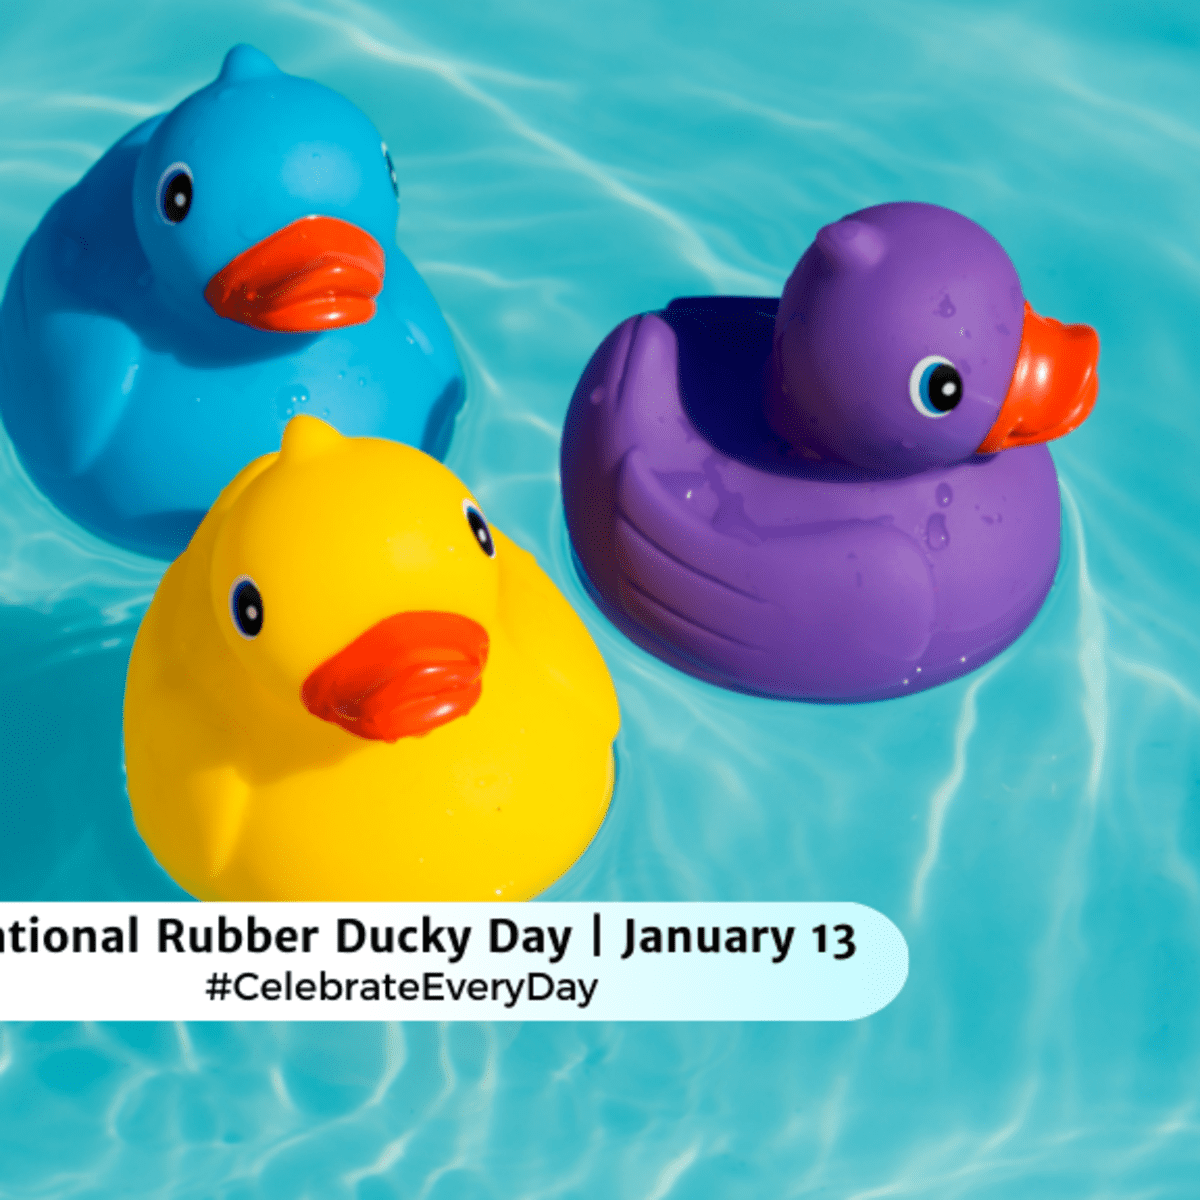 World's largest rubber duck set to visit the Overland Park Convention Center